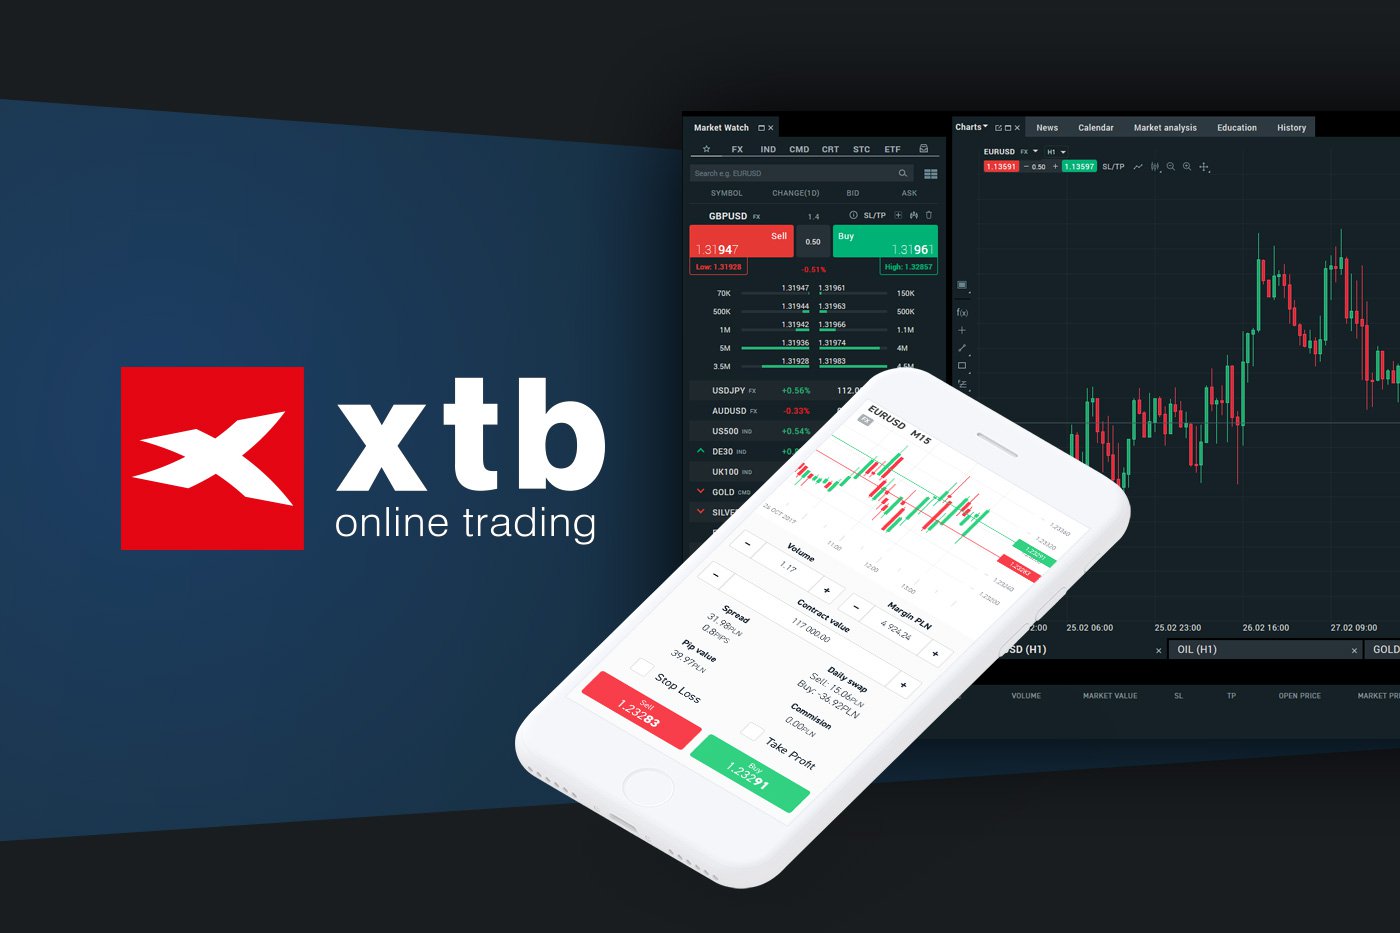 XTB unveils game-changing ETF investment plans